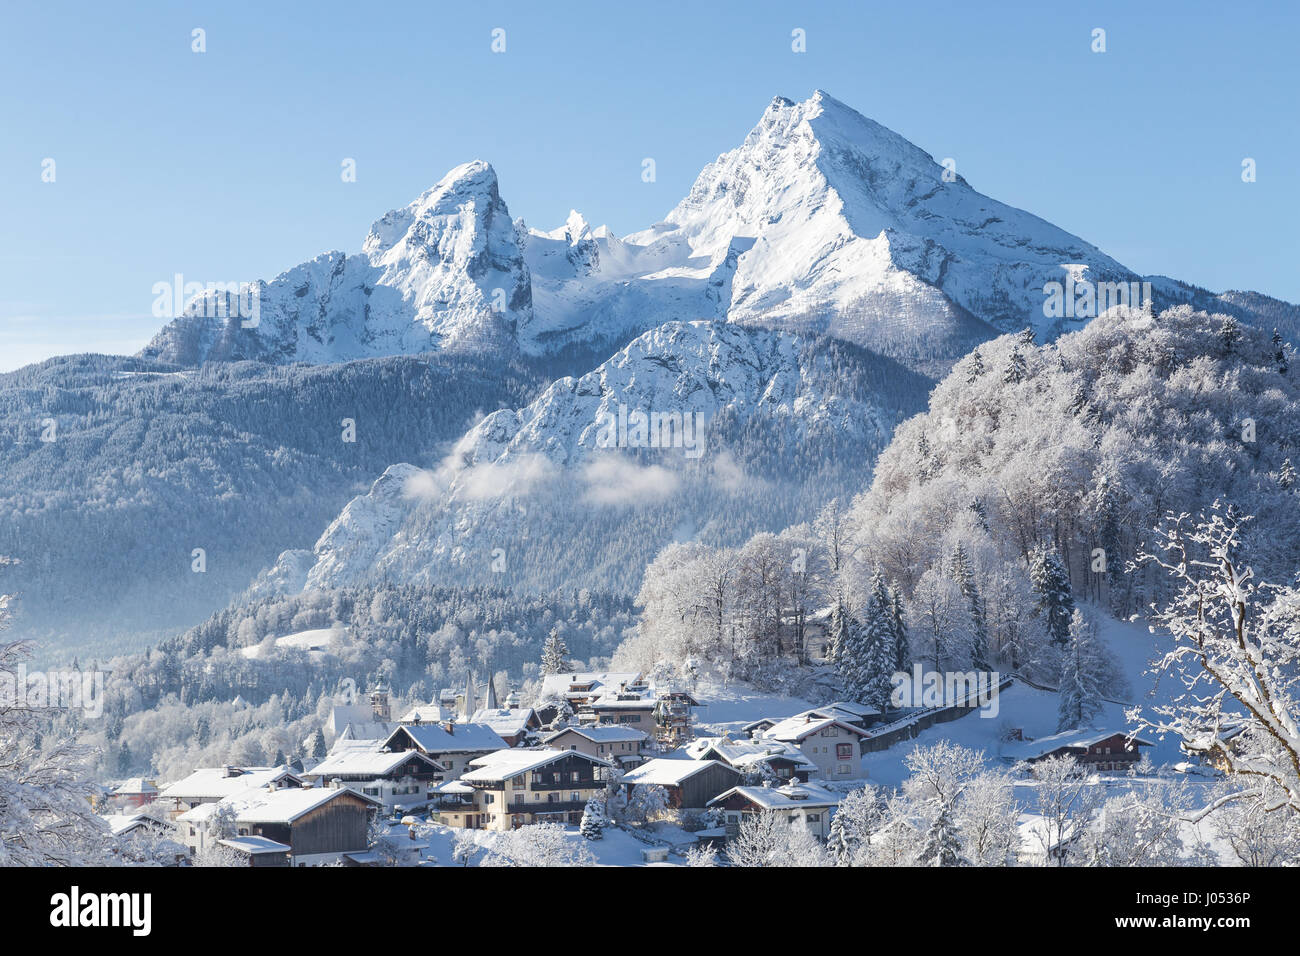 Winter wonderland scenery with the historic town of Berchtesgaden and Watzmann mountain in the Alps, Bavaria, Germany Stock Photo